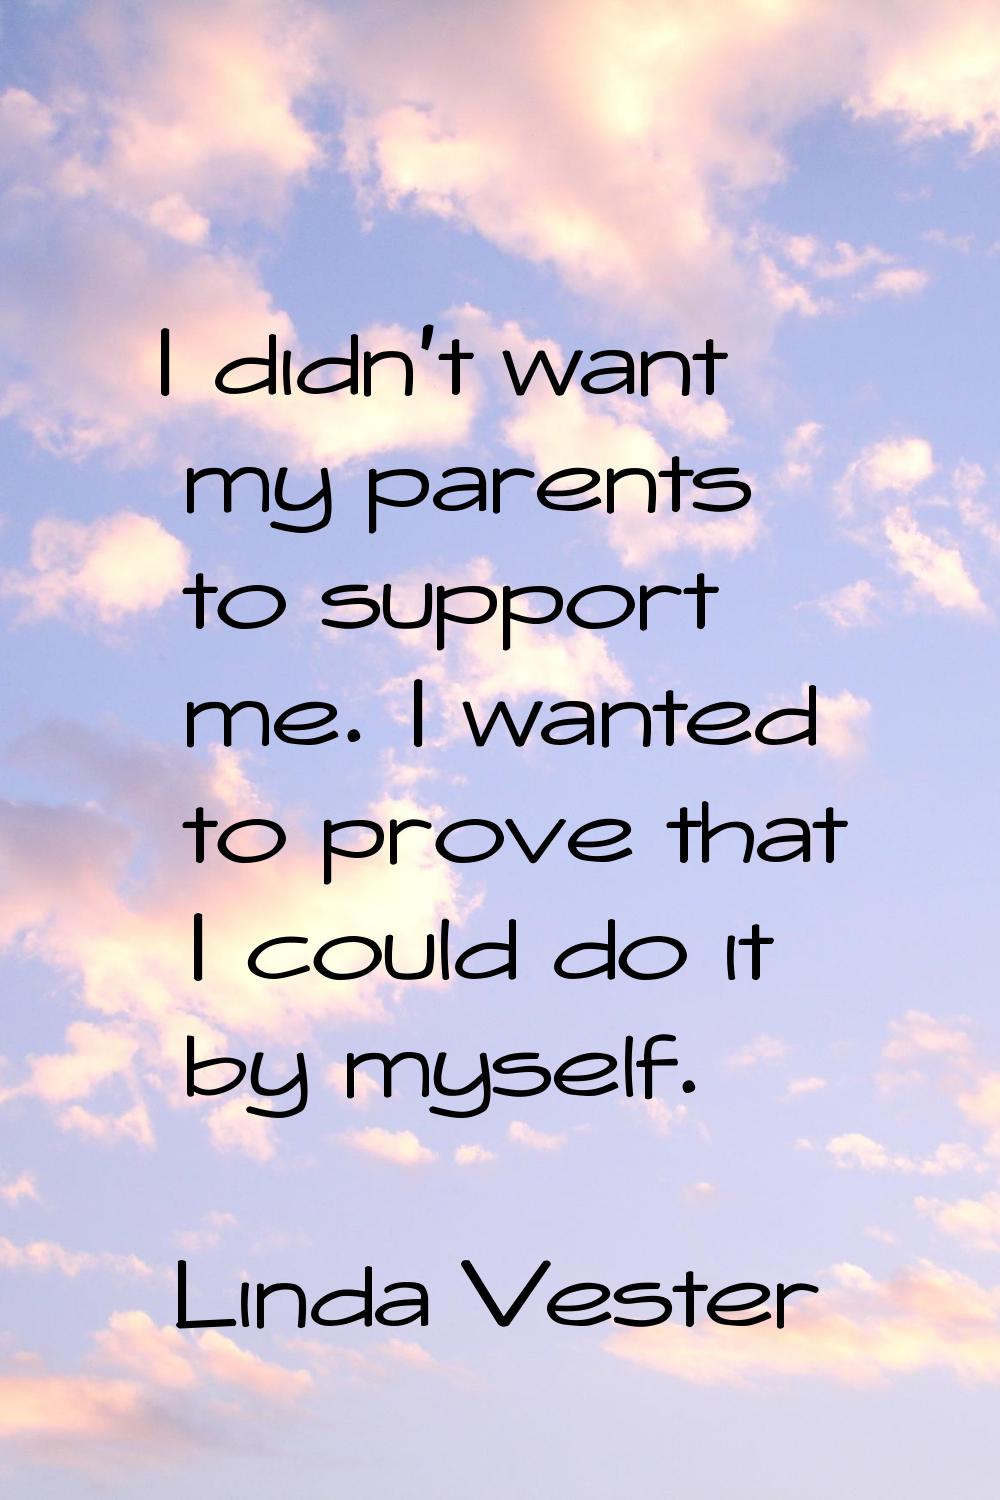 I didn't want my parents to support me. I wanted to prove that I could do it by myself.